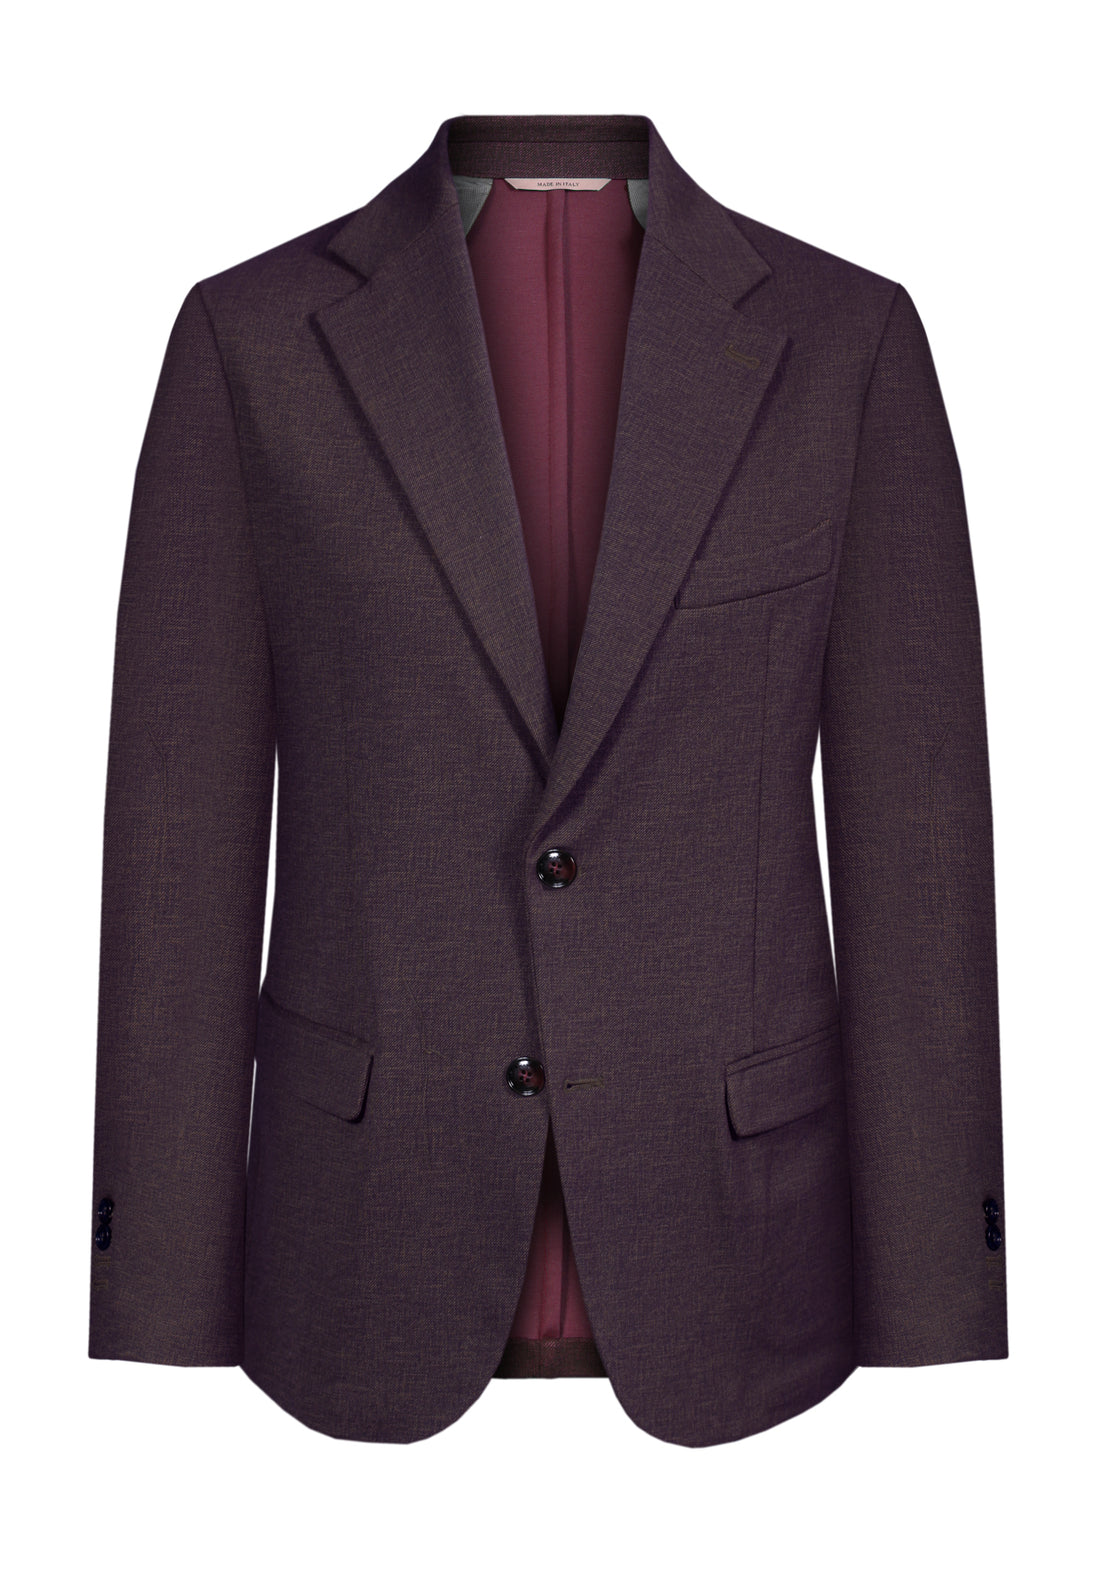 Two-button jacket in elastic fabric - Bordeaux